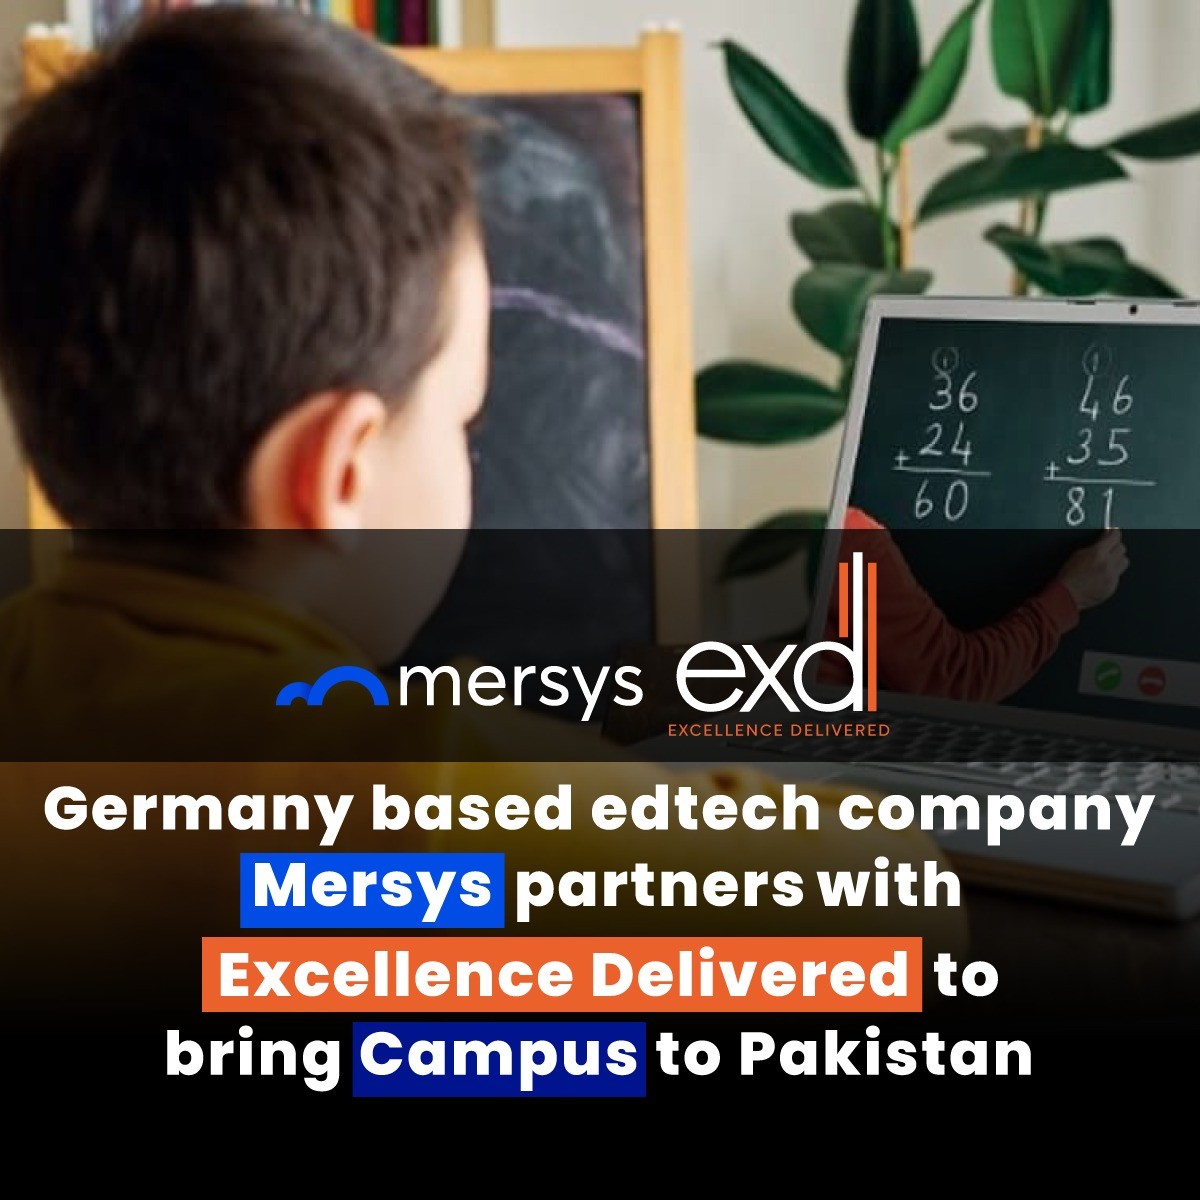 German Ed Tech Company Mersys enters Pakistani market by partnering with Excellence Delivered